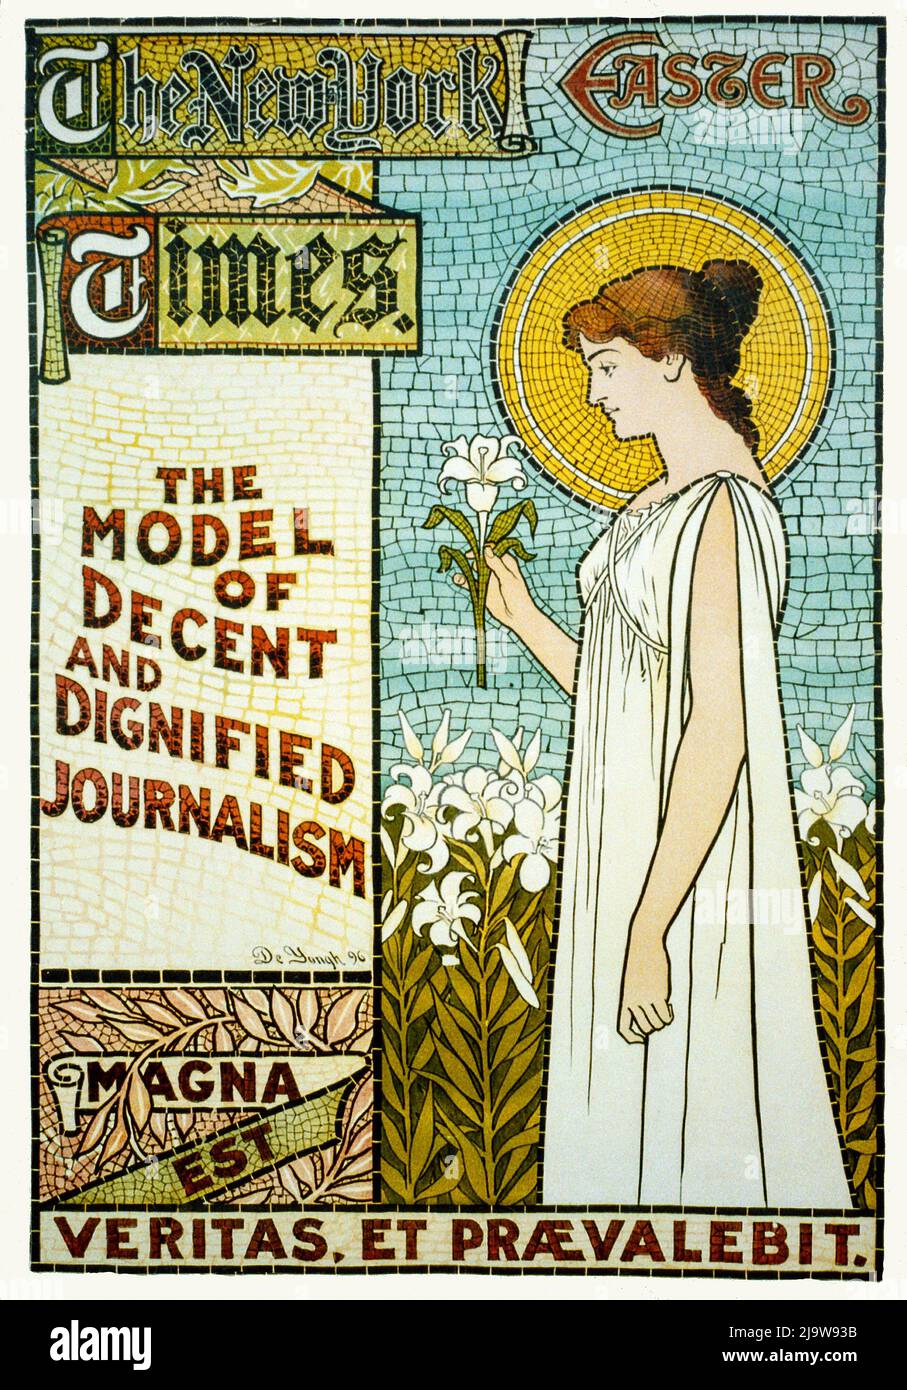 An Art Nouveau poster for The New York Times, Easter 1896, stressing their model of decent and dignified journalism. Stock Photo